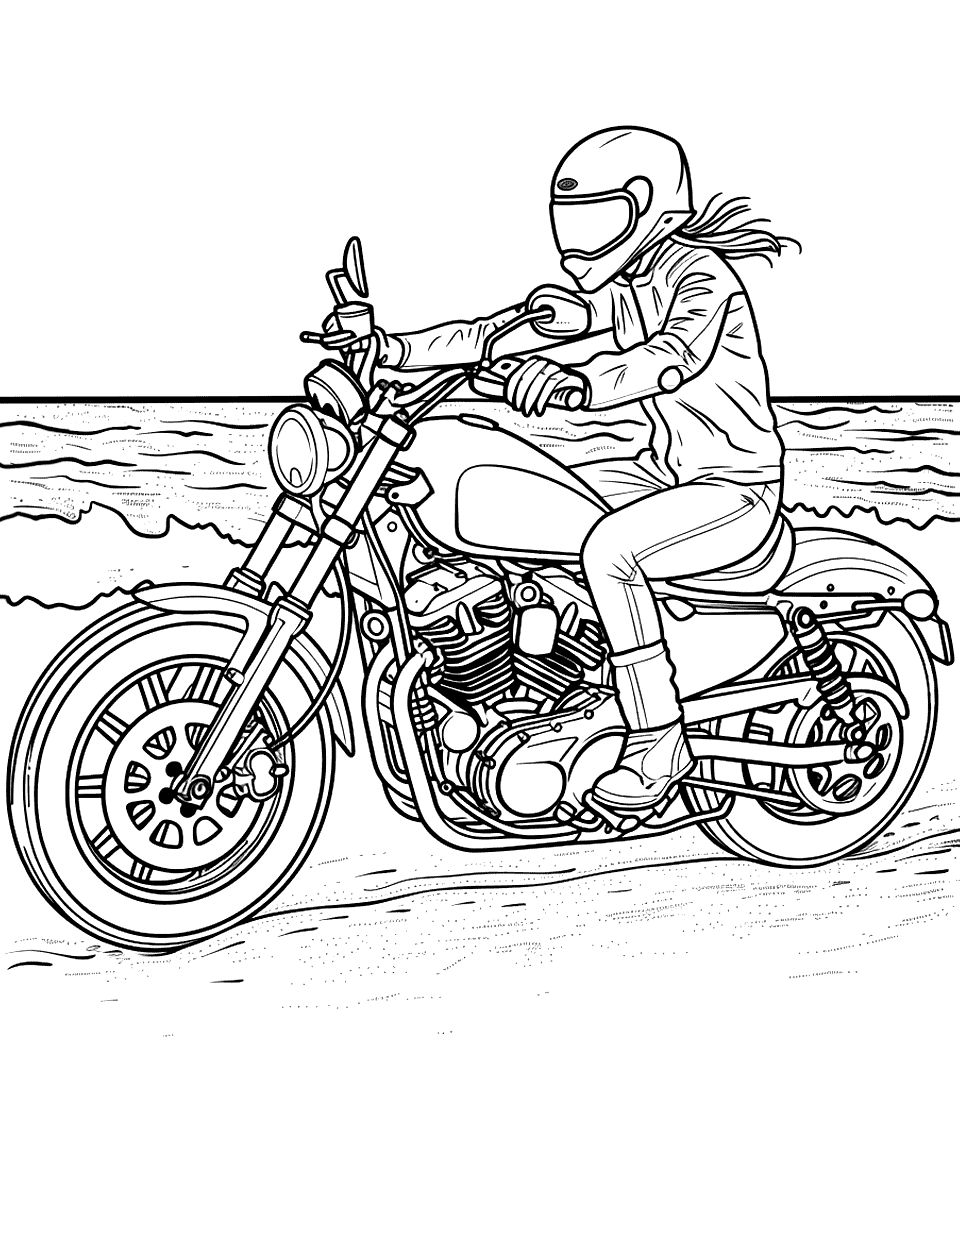 Beachside Motorcycle Ride Coloring Page - A motorcycle riding along the beach.